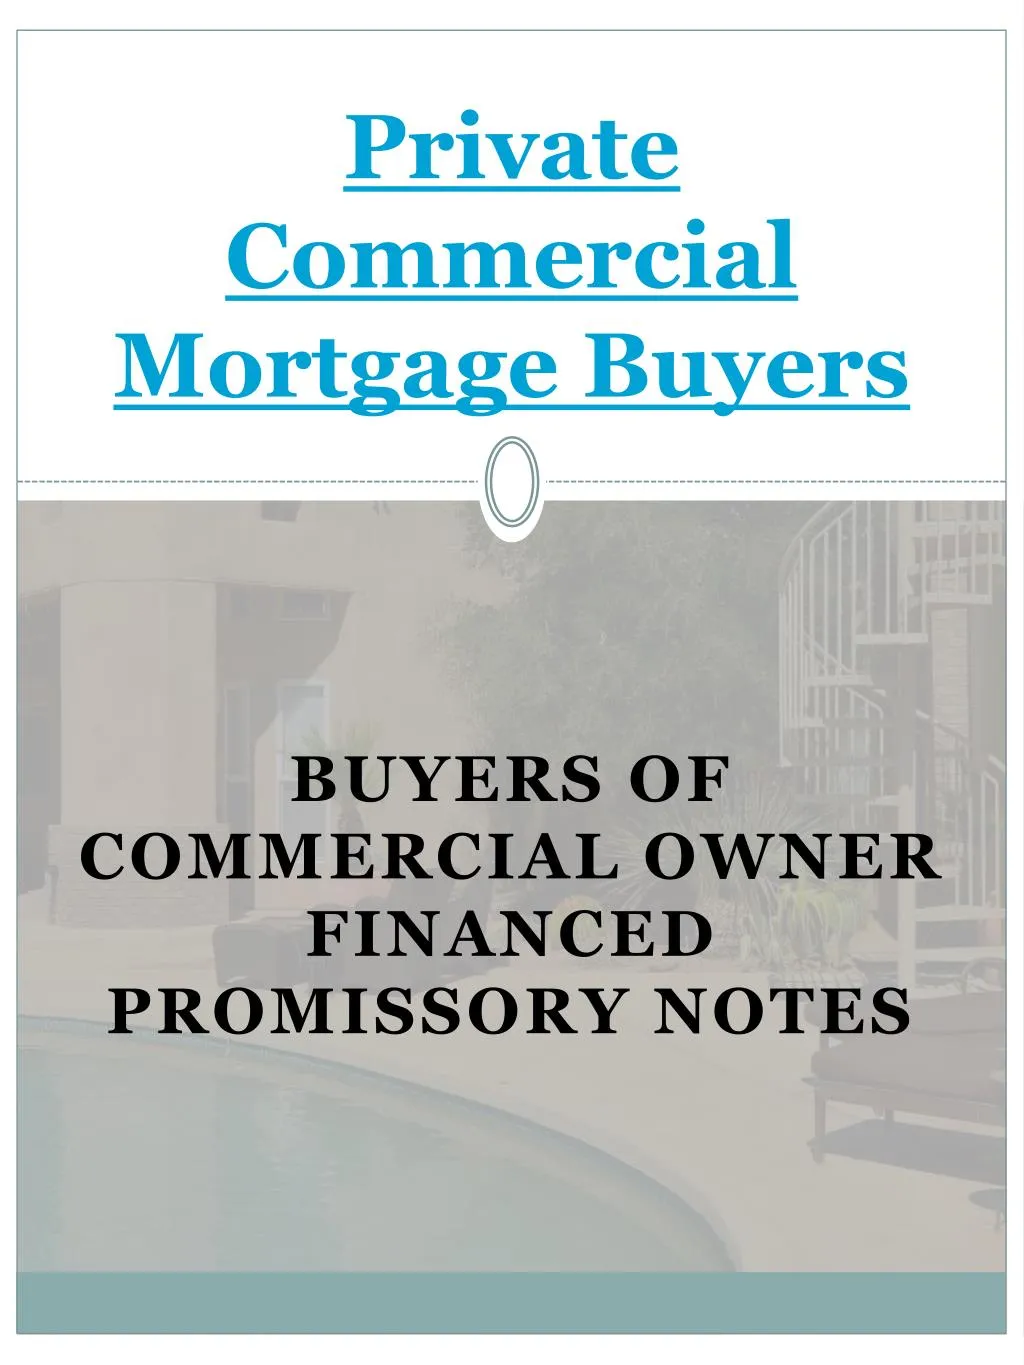 private commercial mortgage buyers